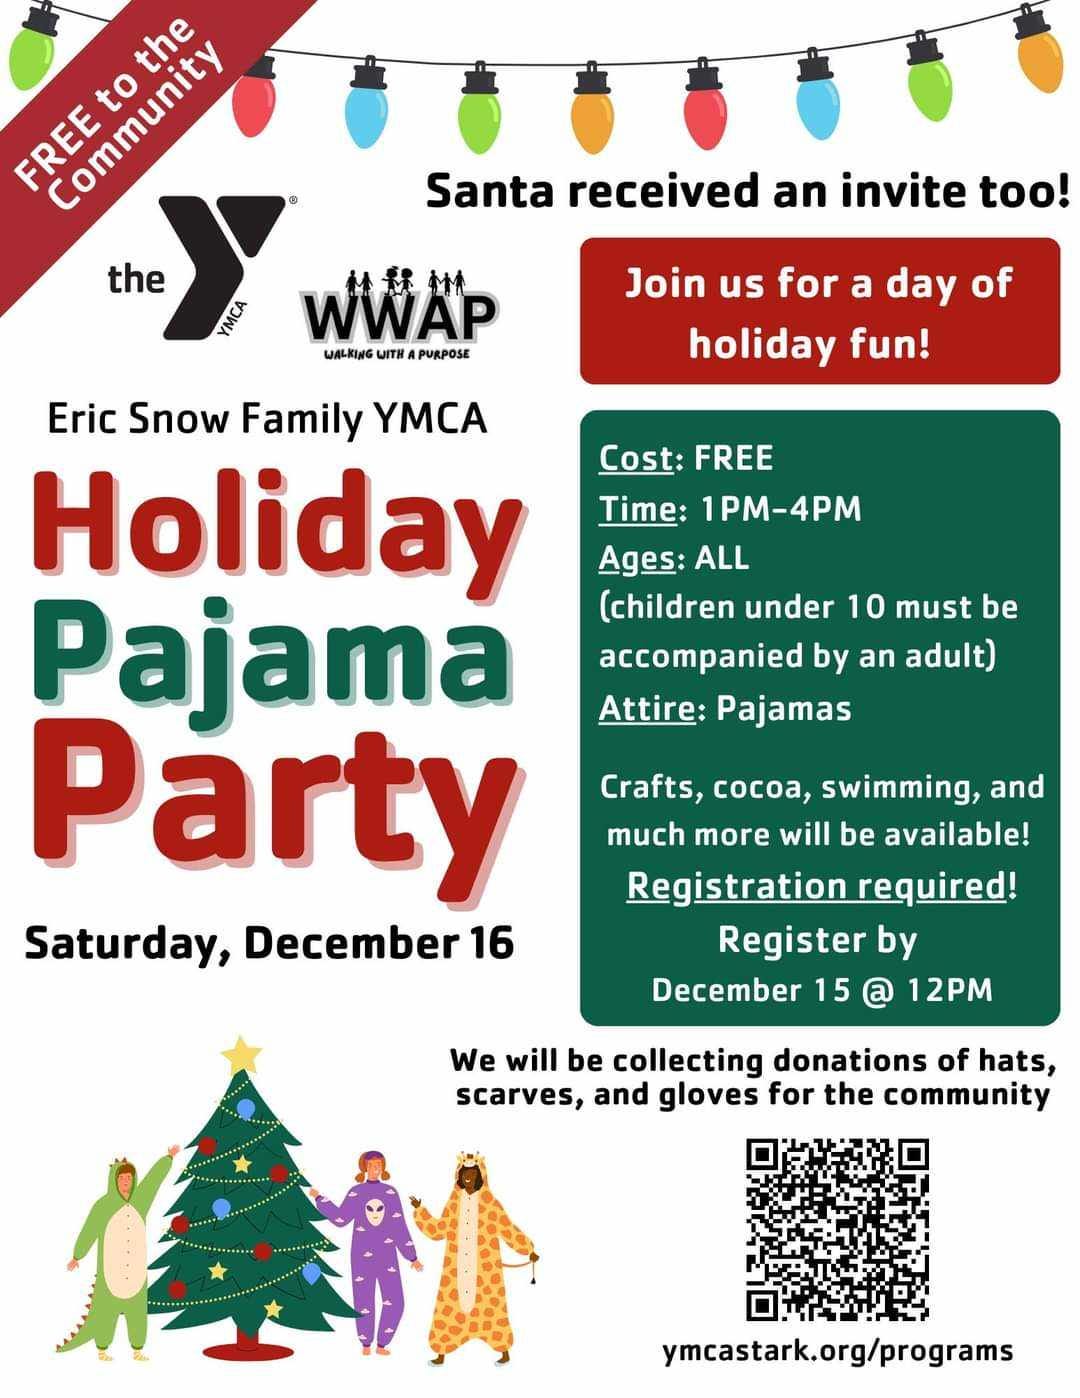 Free Holiday Pajama Party set for Dec. 16 at Eric Snow Family YMCA in Canton